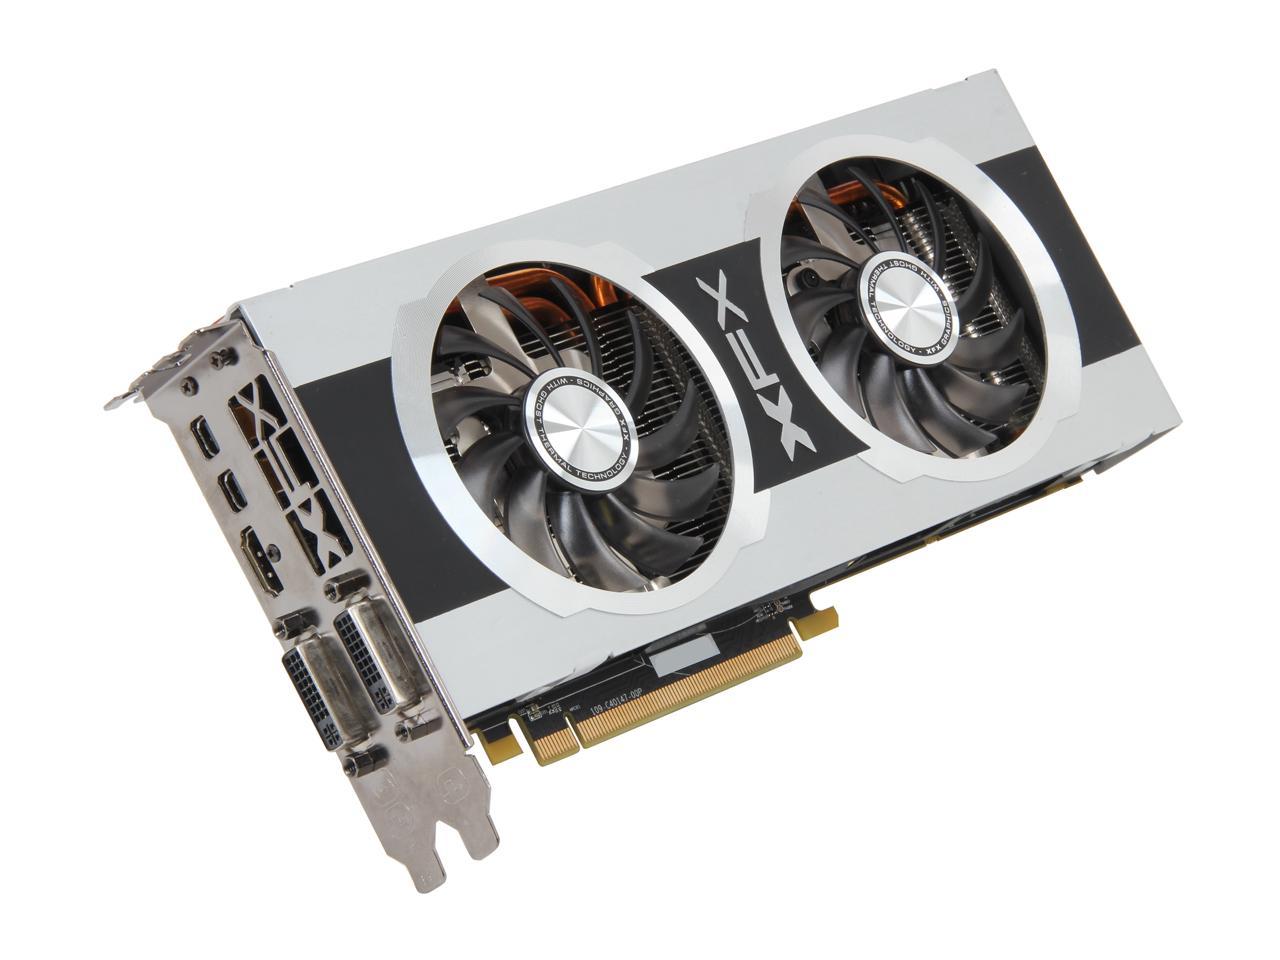 xfx r7800 ghost drivers for mac